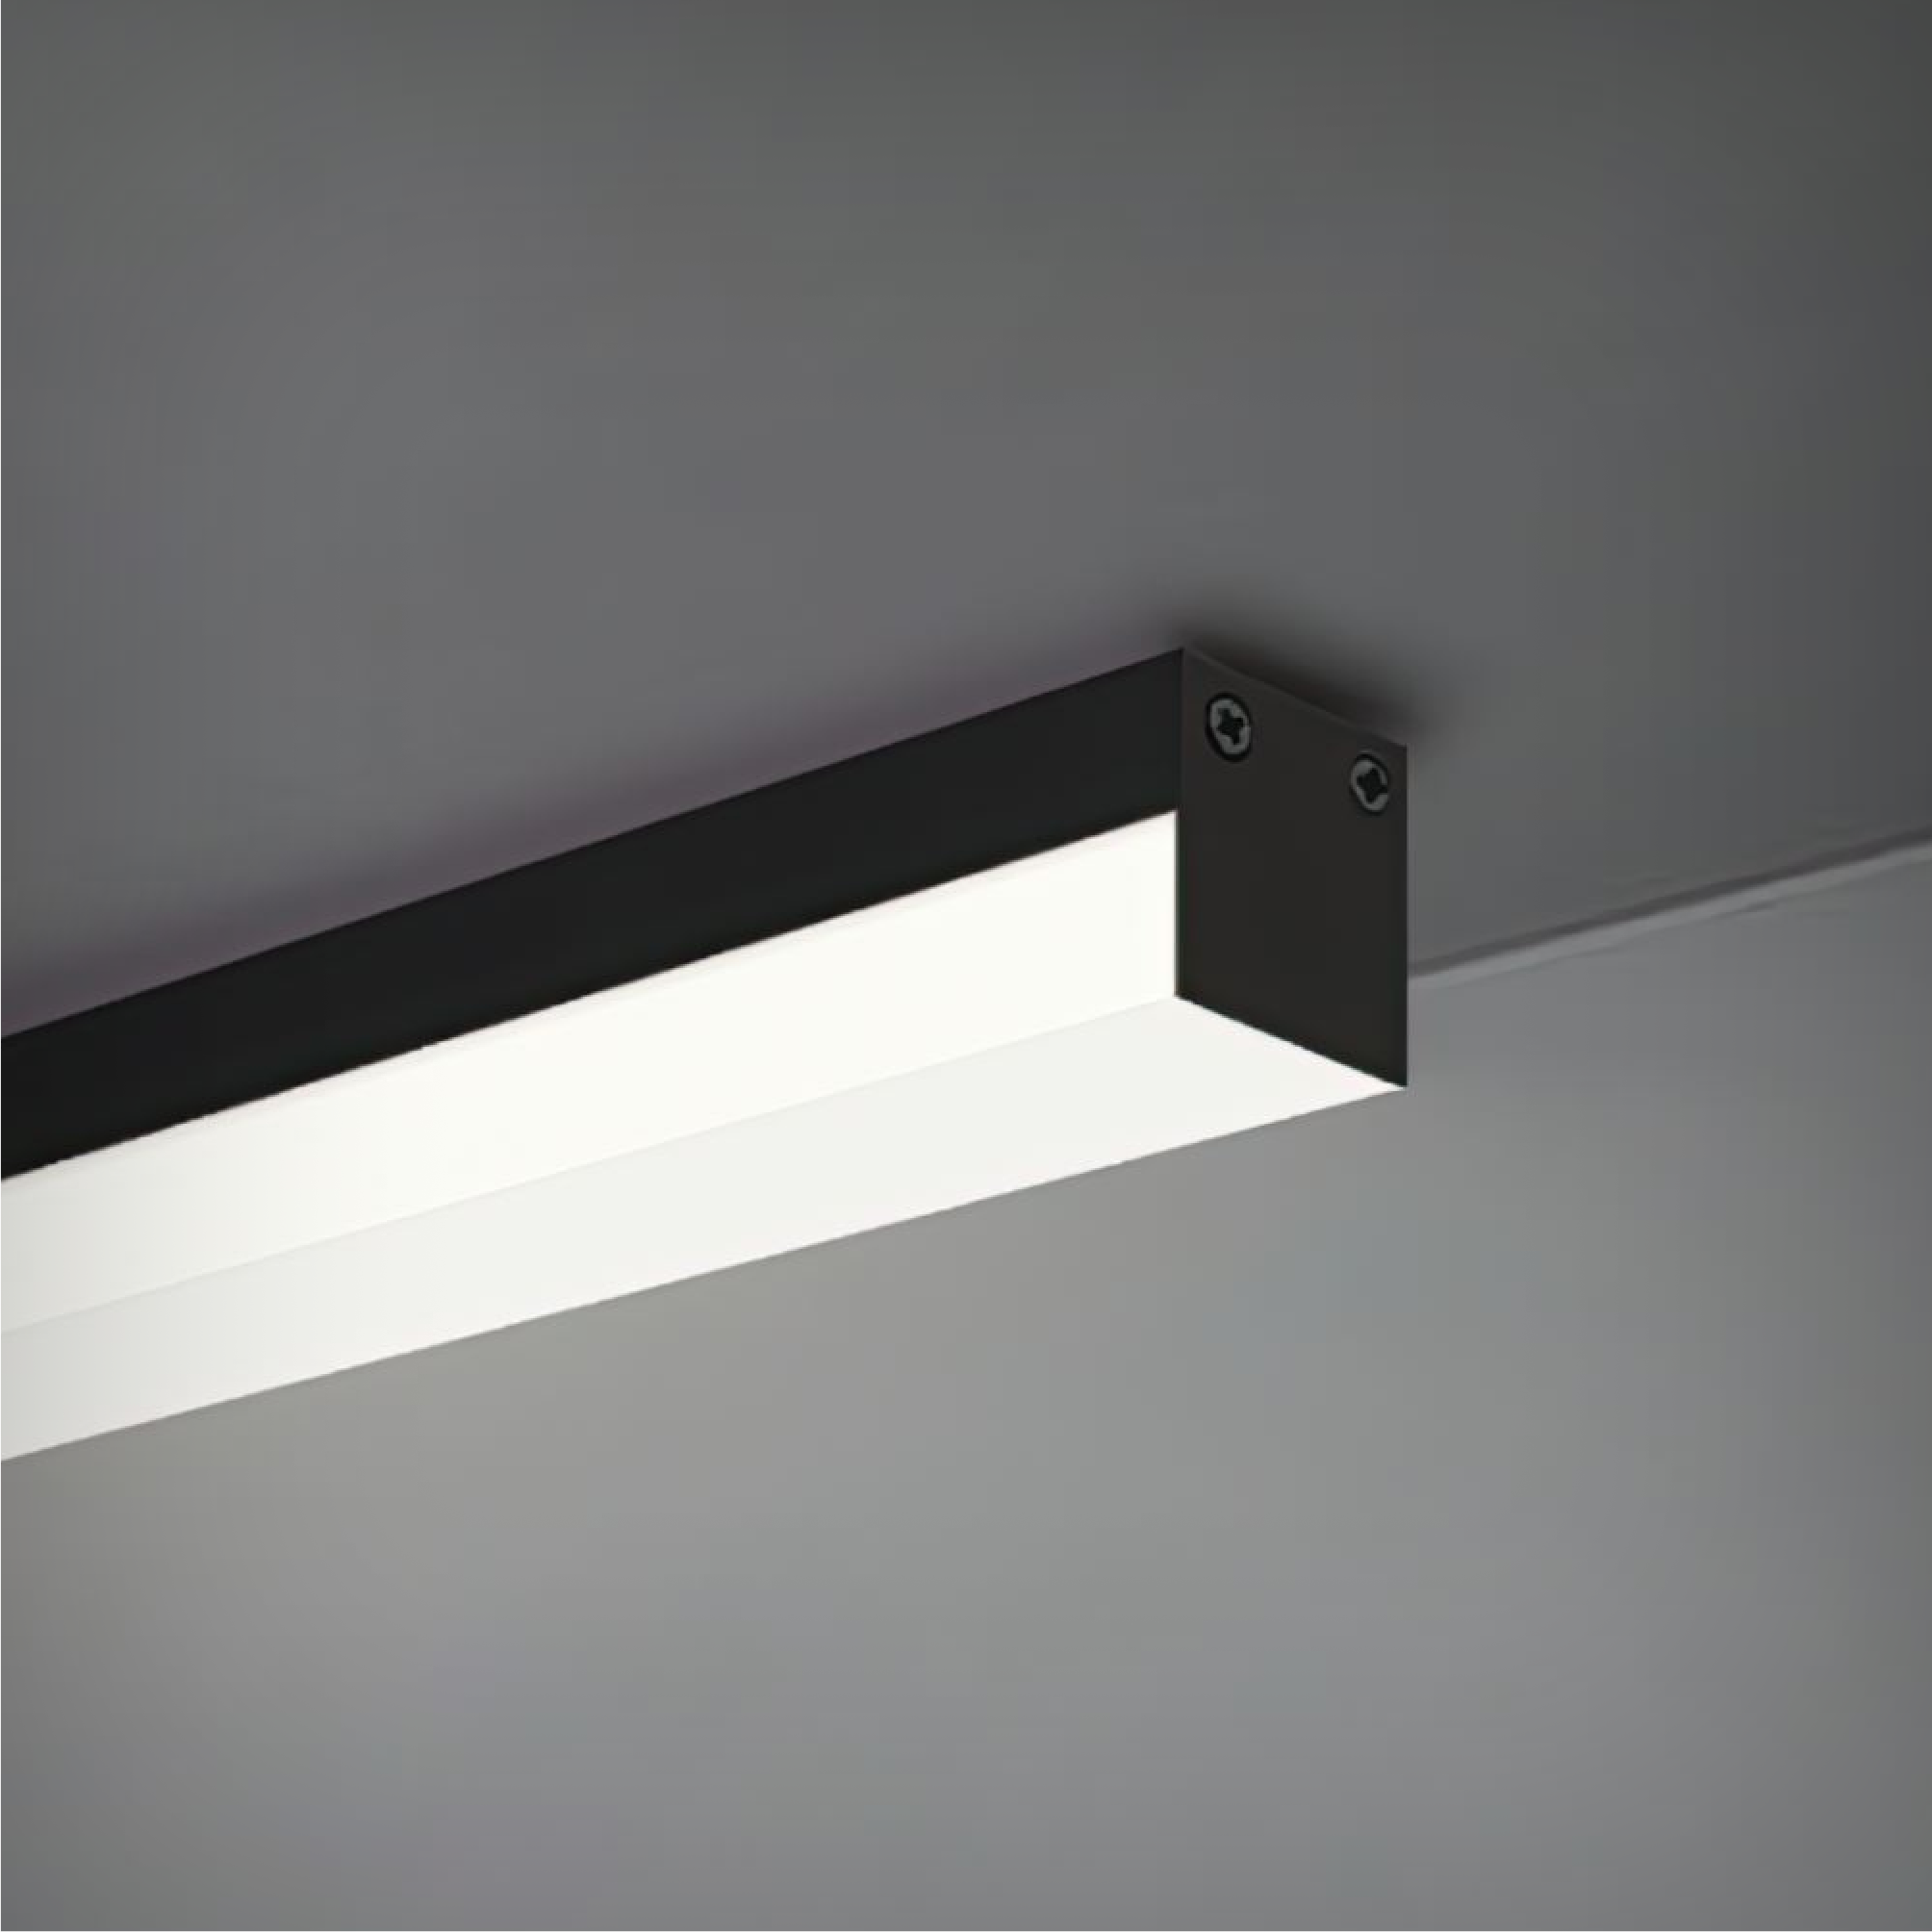 Slim LED Linear Ceiling Light with a 0.75-Inch profile